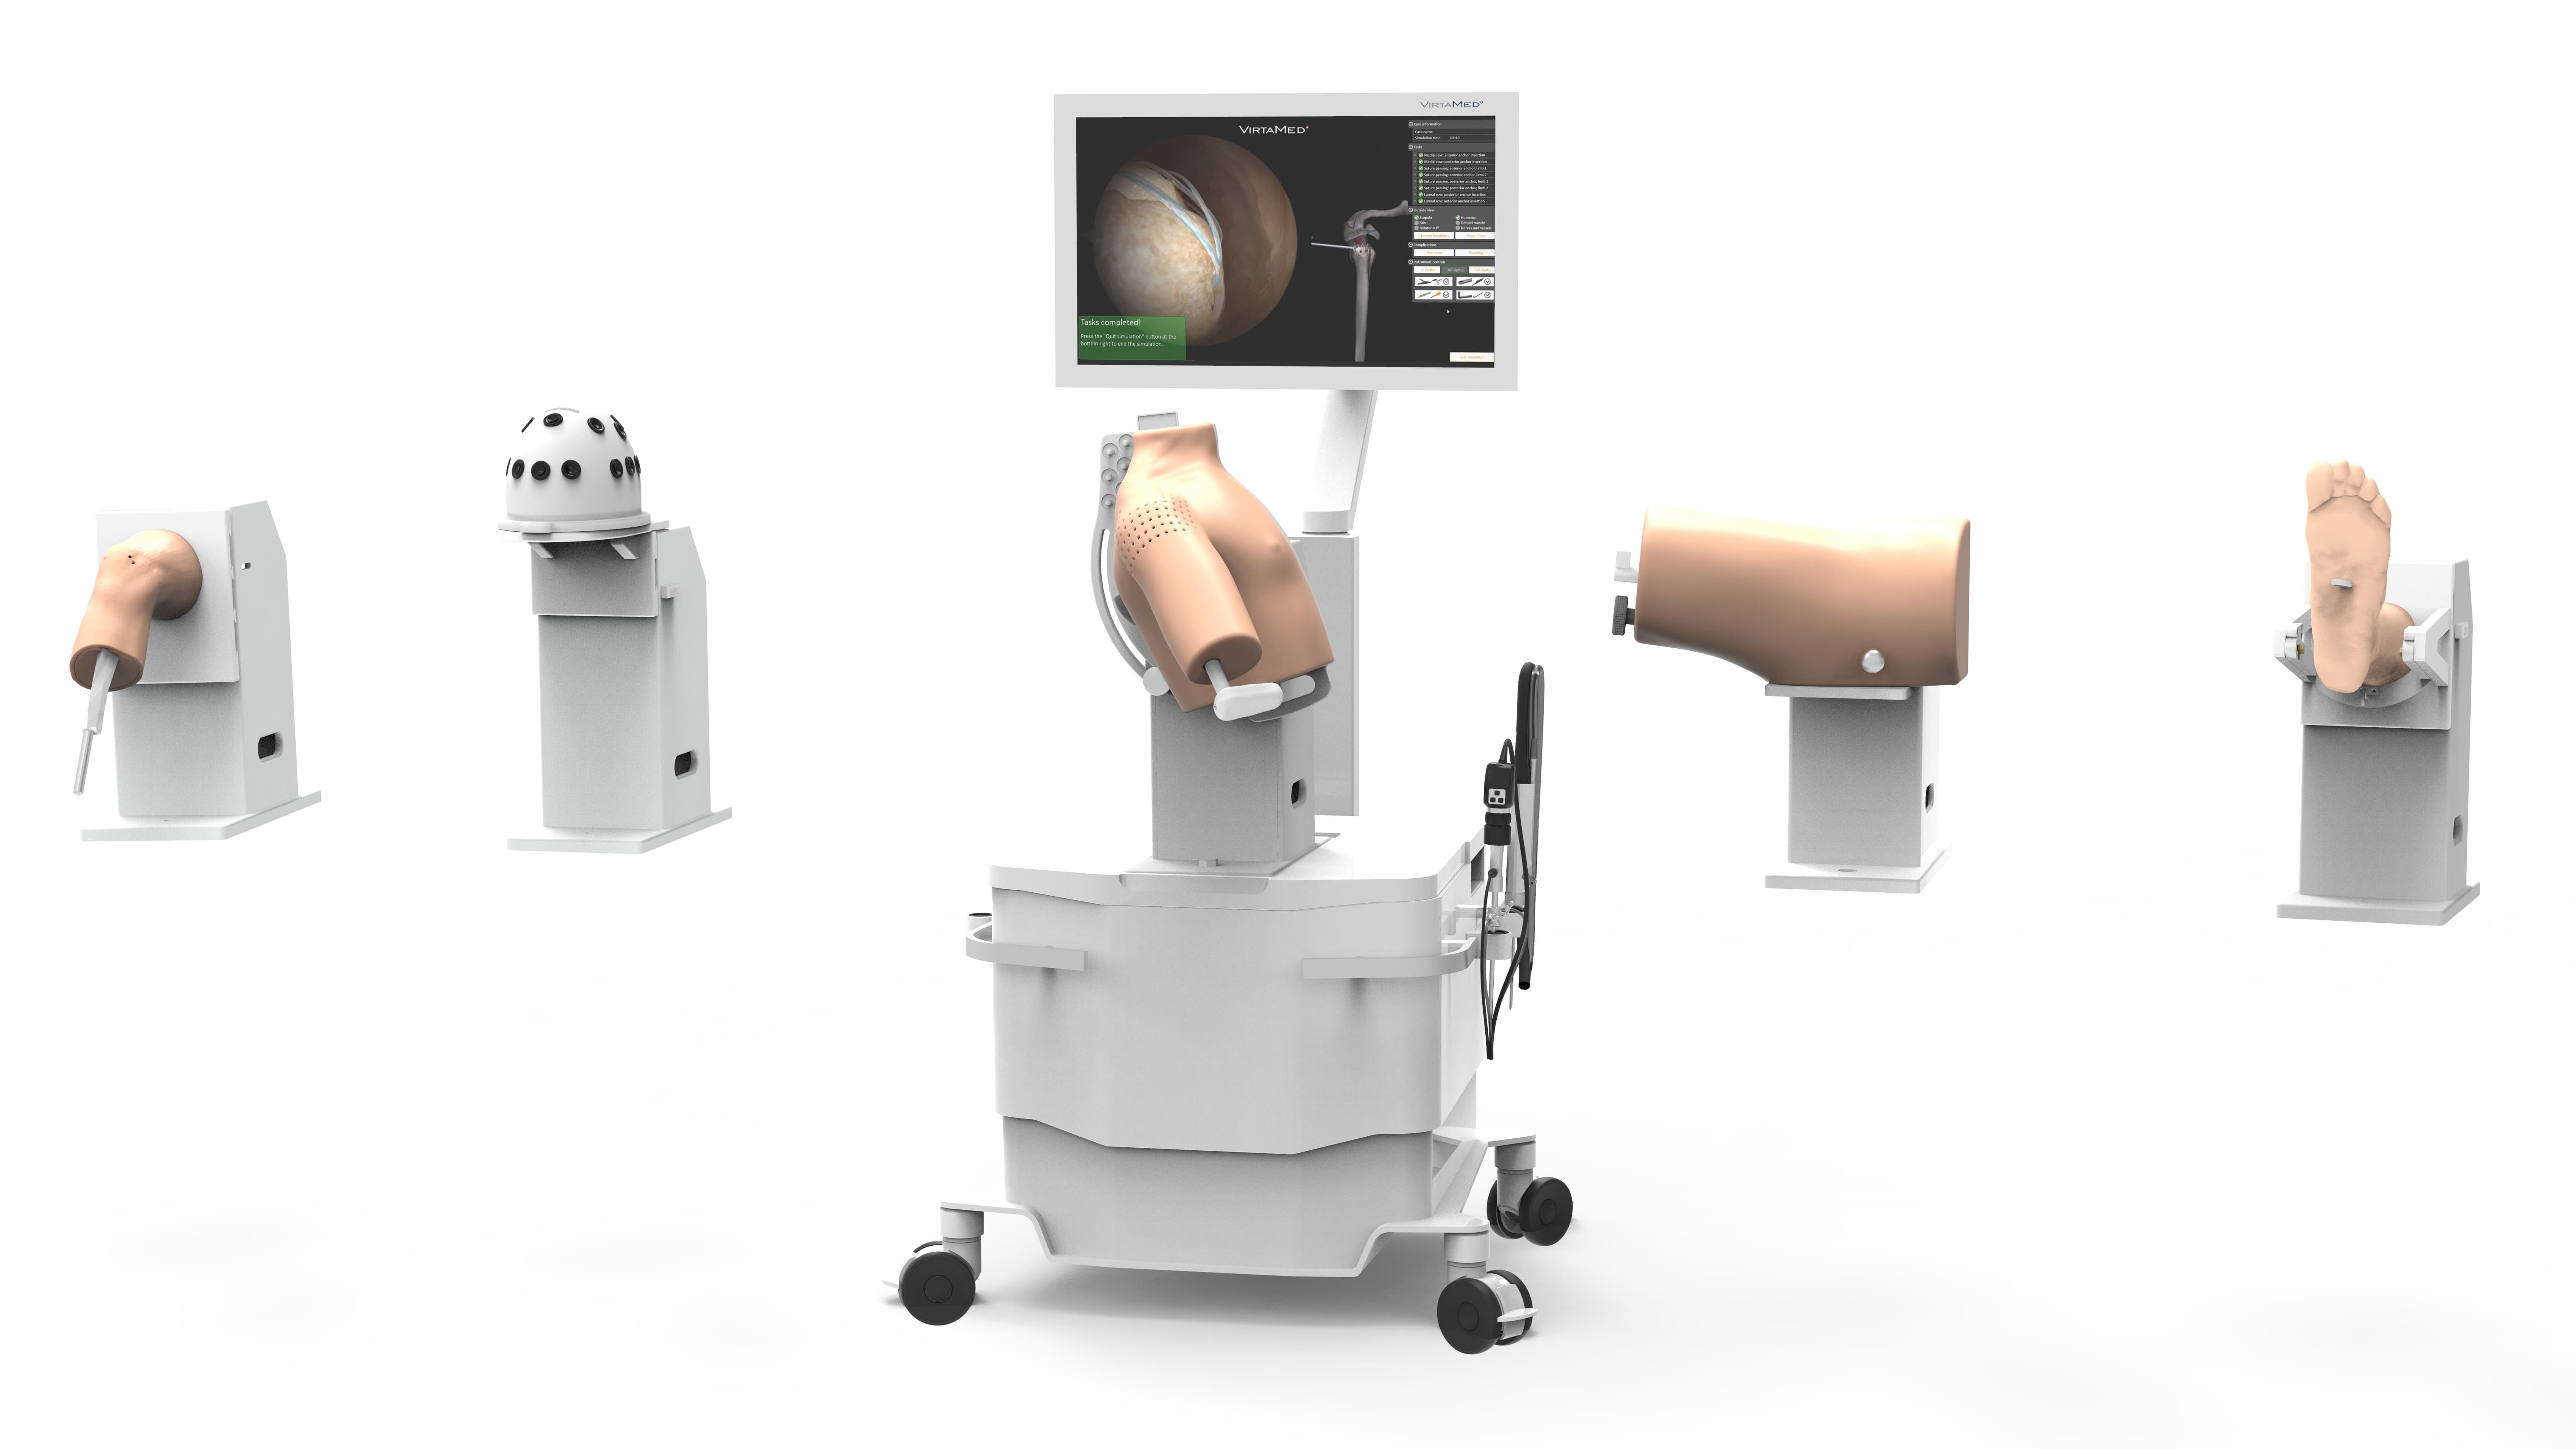 Highly realistic surgical simulators for medical training.